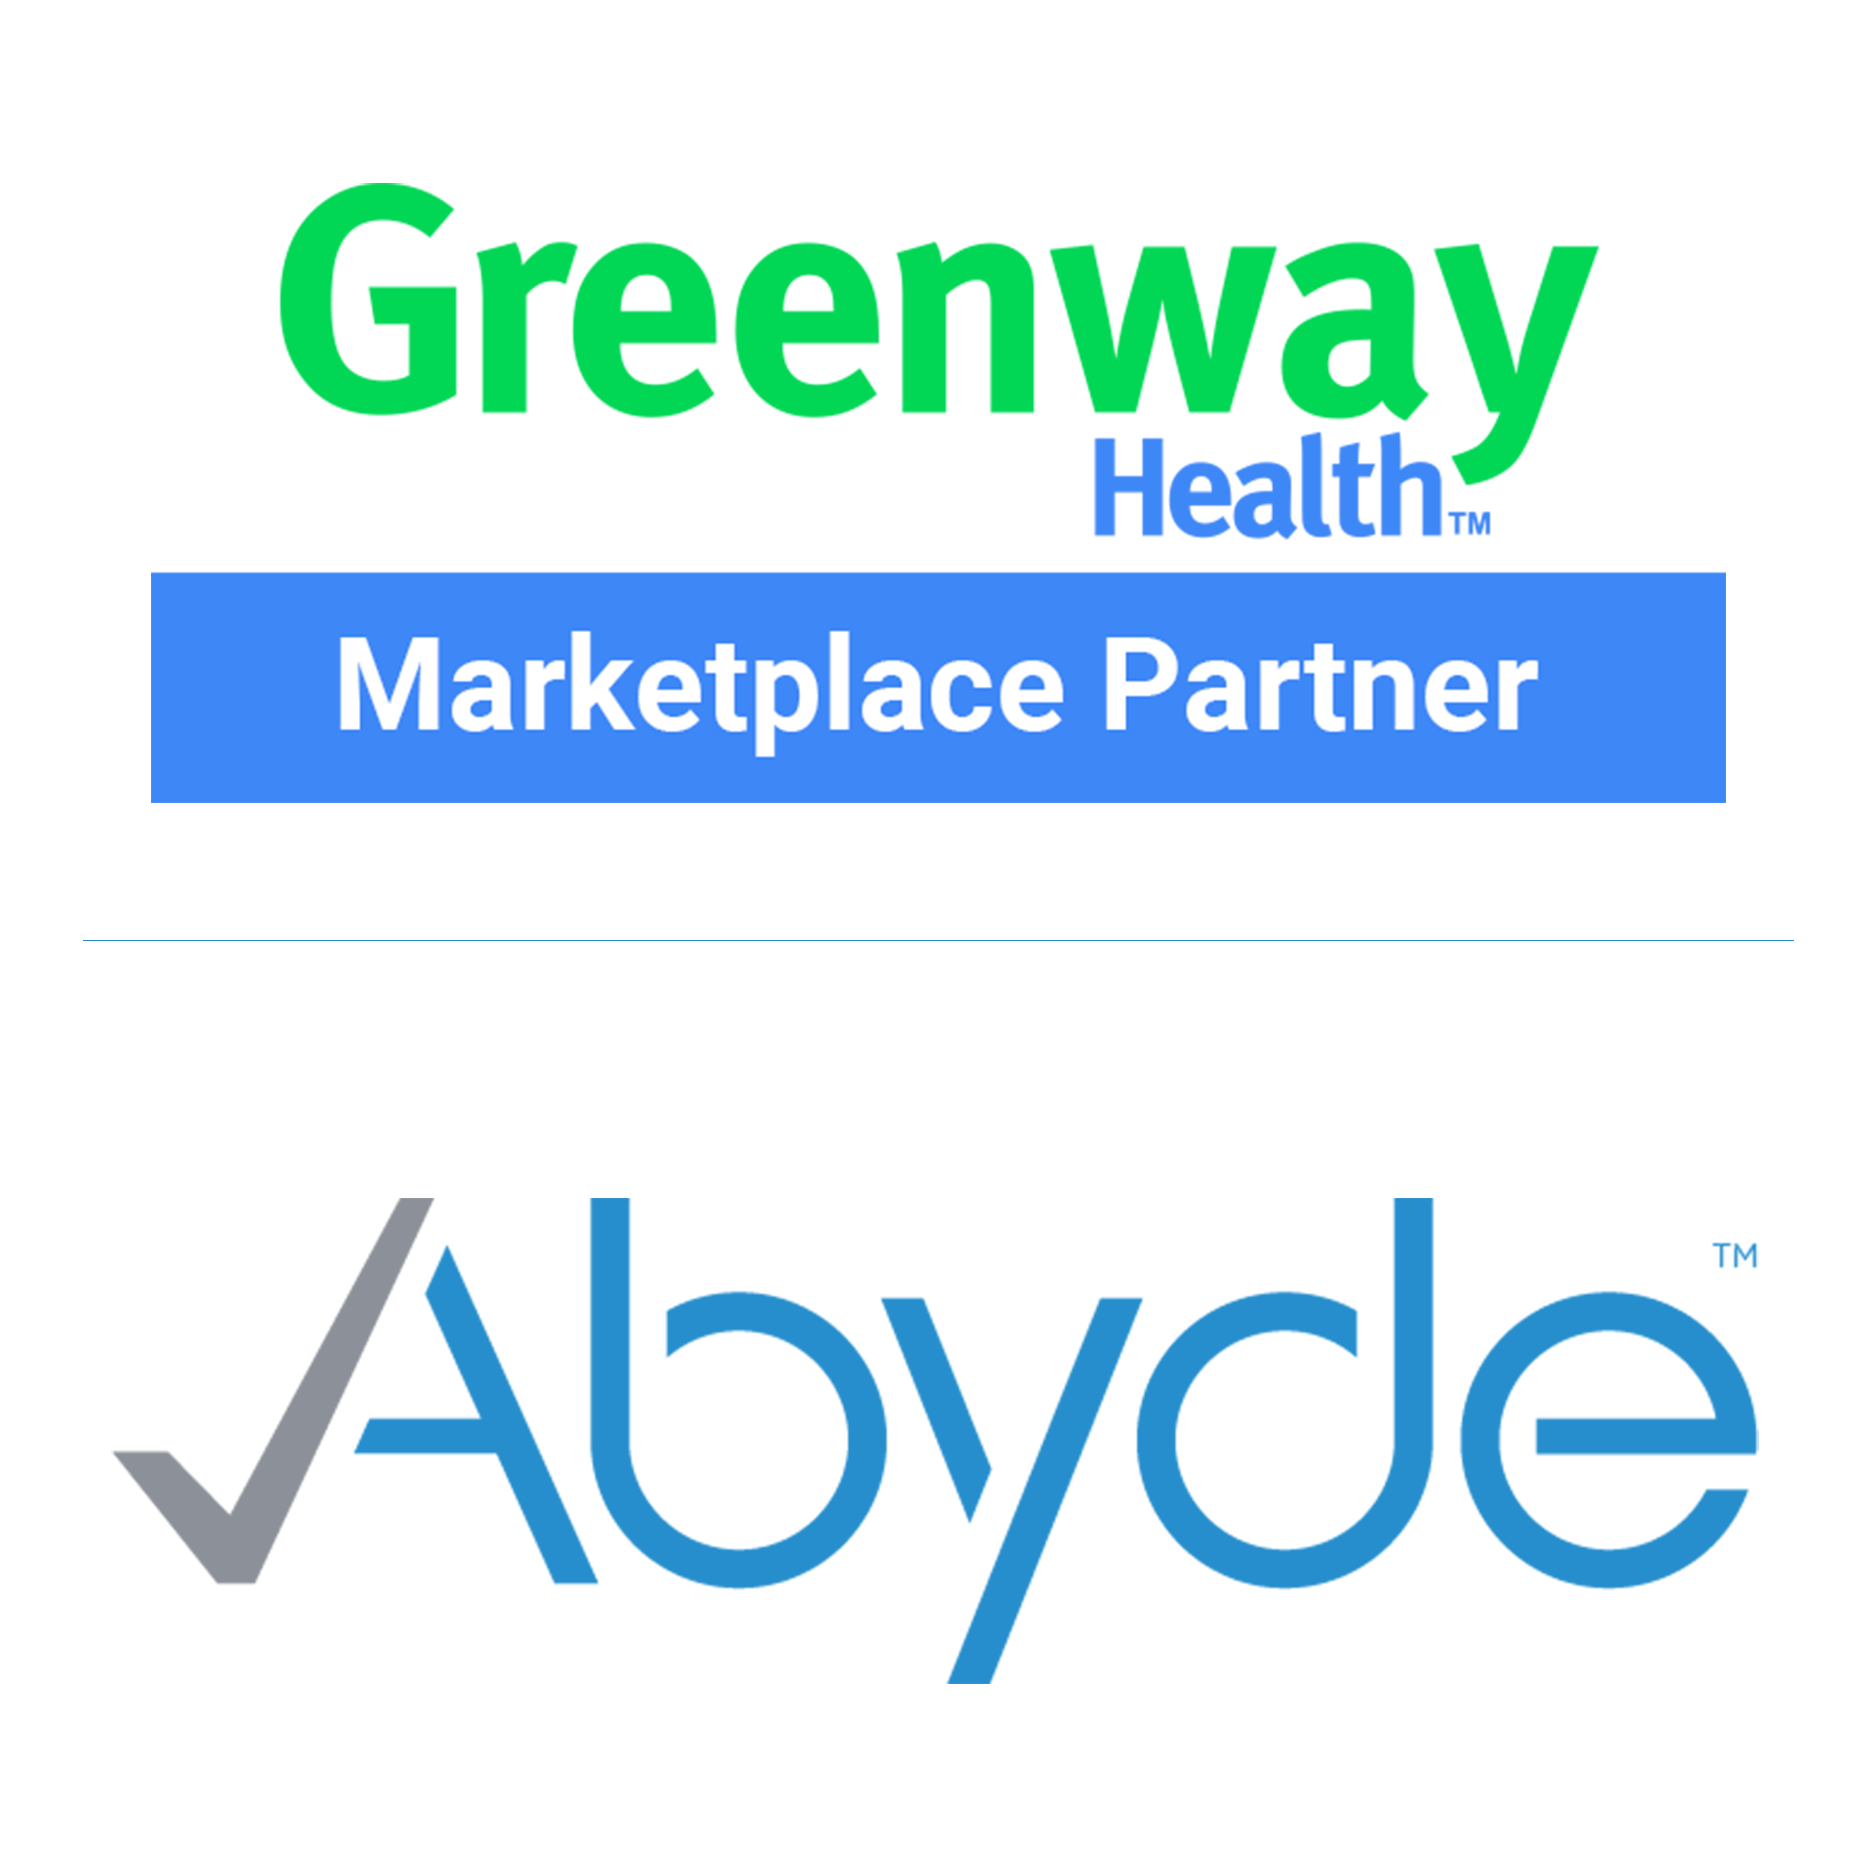 Abyde’s HIPAA compliance software joins Greenway Health Marketplace for comprehensive health IT solutions